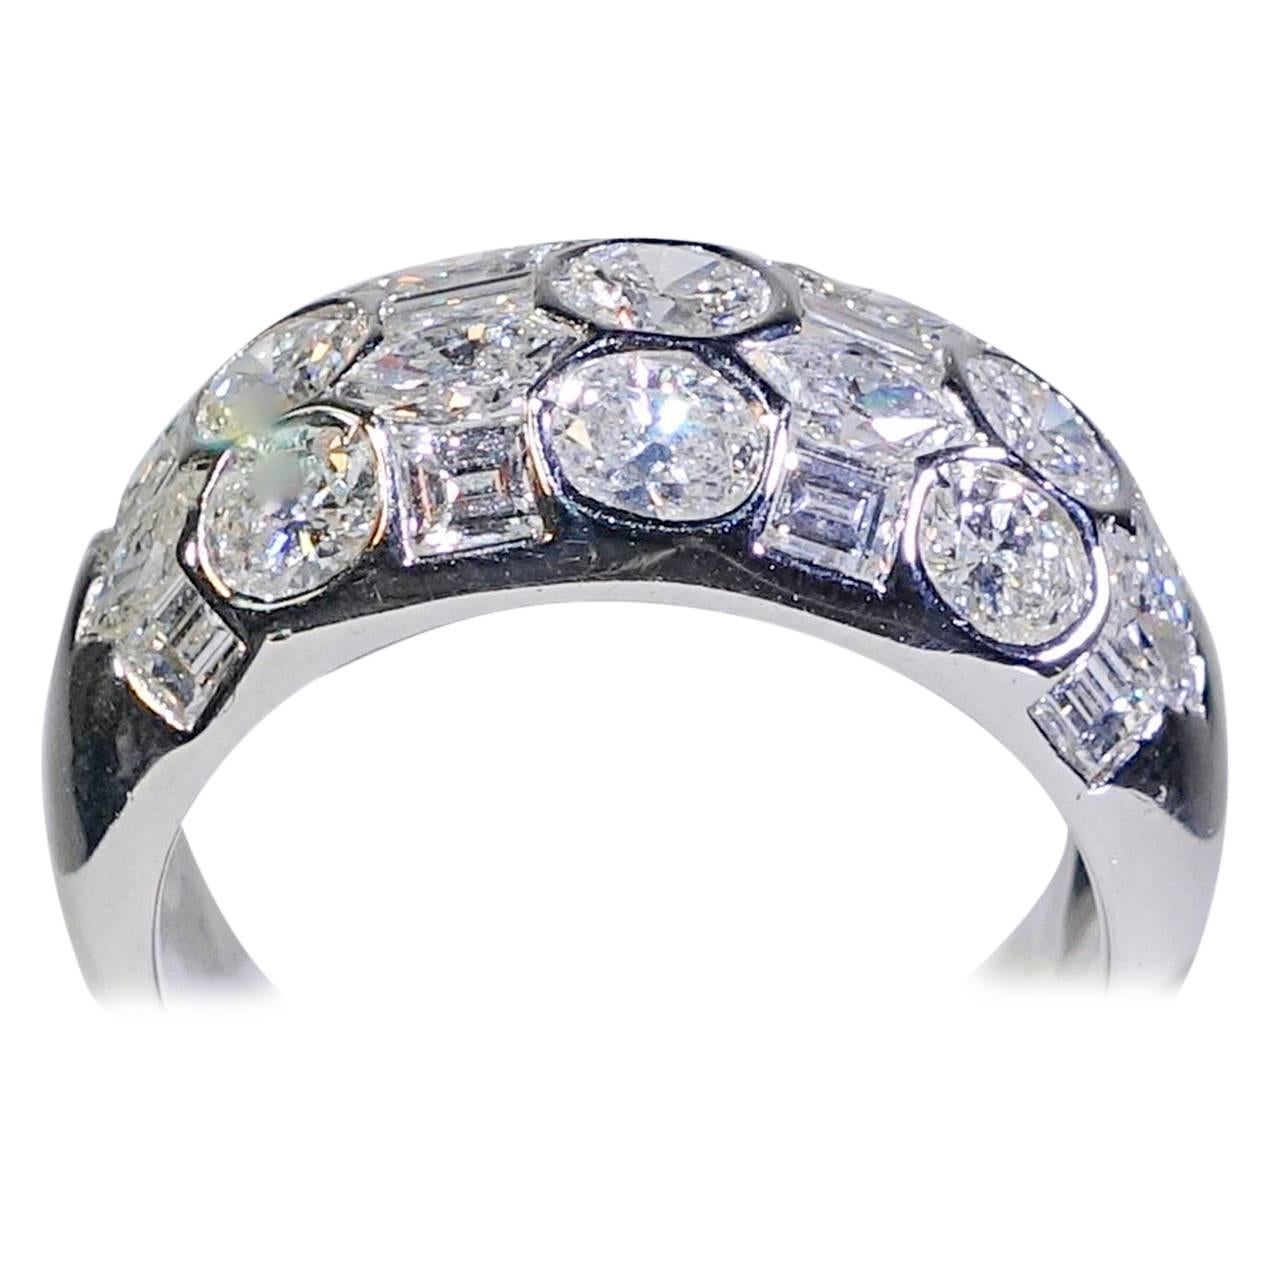 Diamond band with 29 stones amounting to an estimated 2.50 cts of fine white fancy cut diamonds - all near colorless (G/H), and very slightly included (VS1).  The diamonds are oval cut, marquis cut, square cut and baguette cut. They are set well in